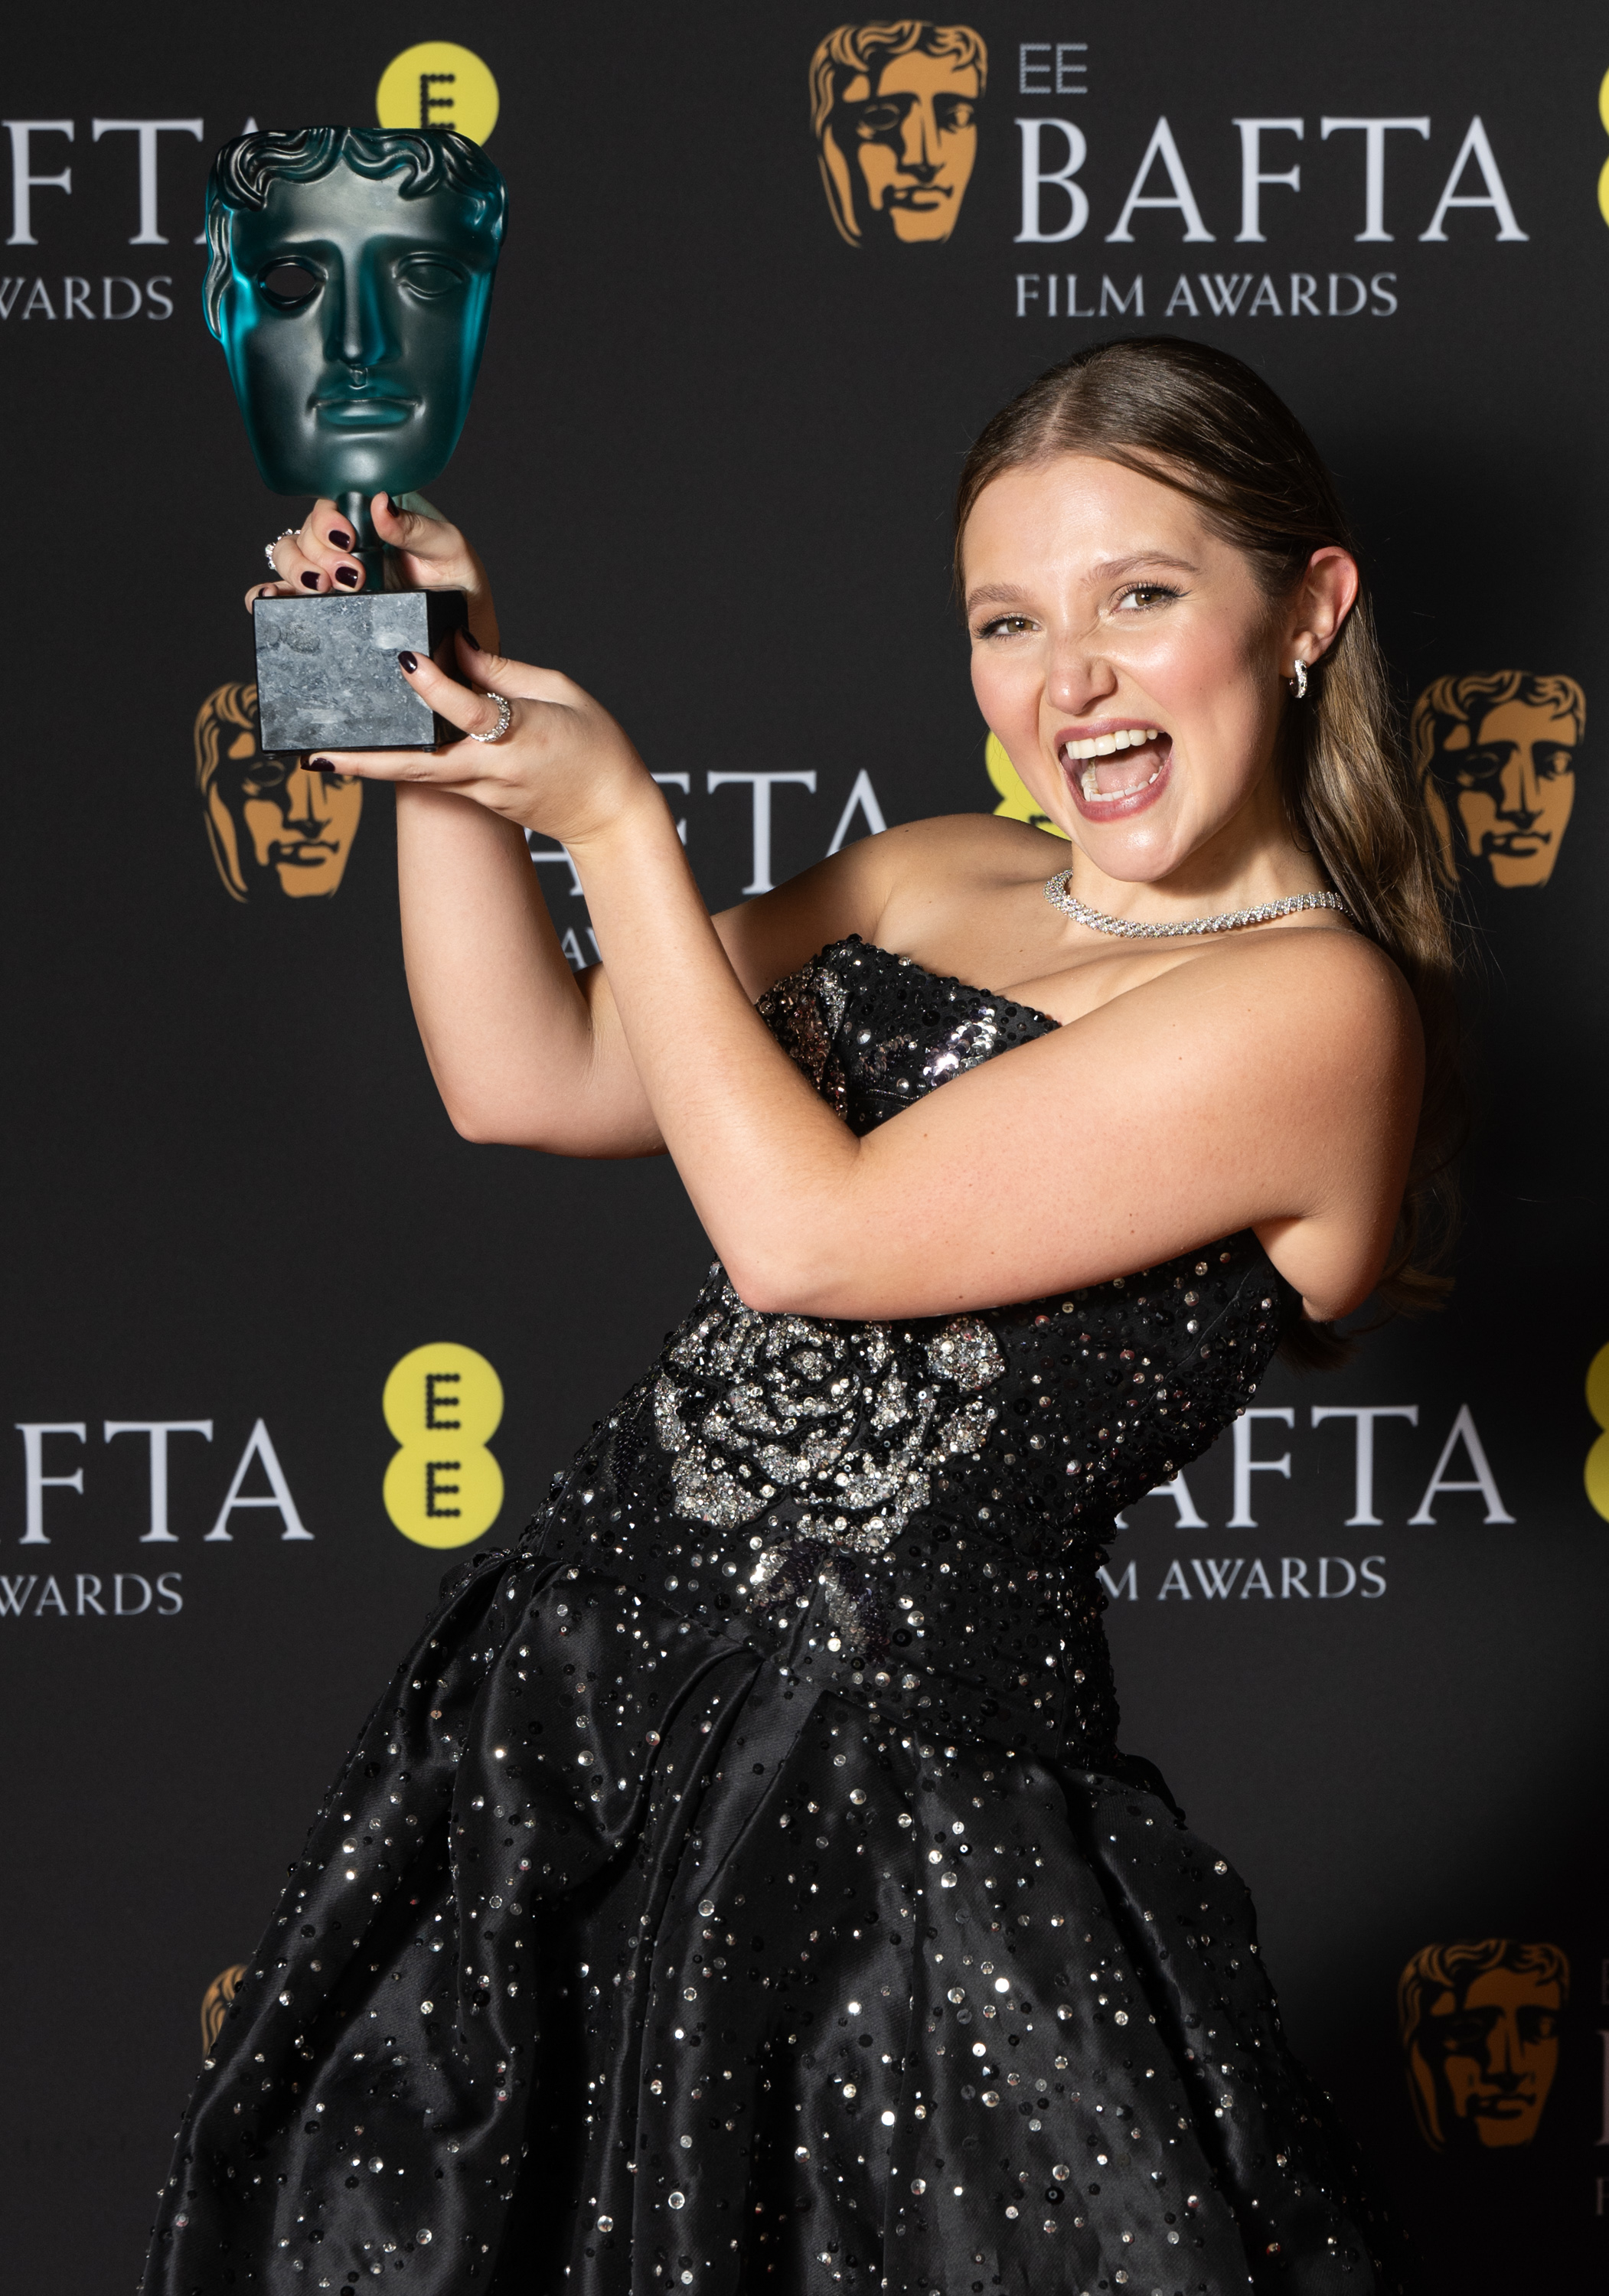 Woman in sparkling strapless gown taking a selfie with a BAFTA award